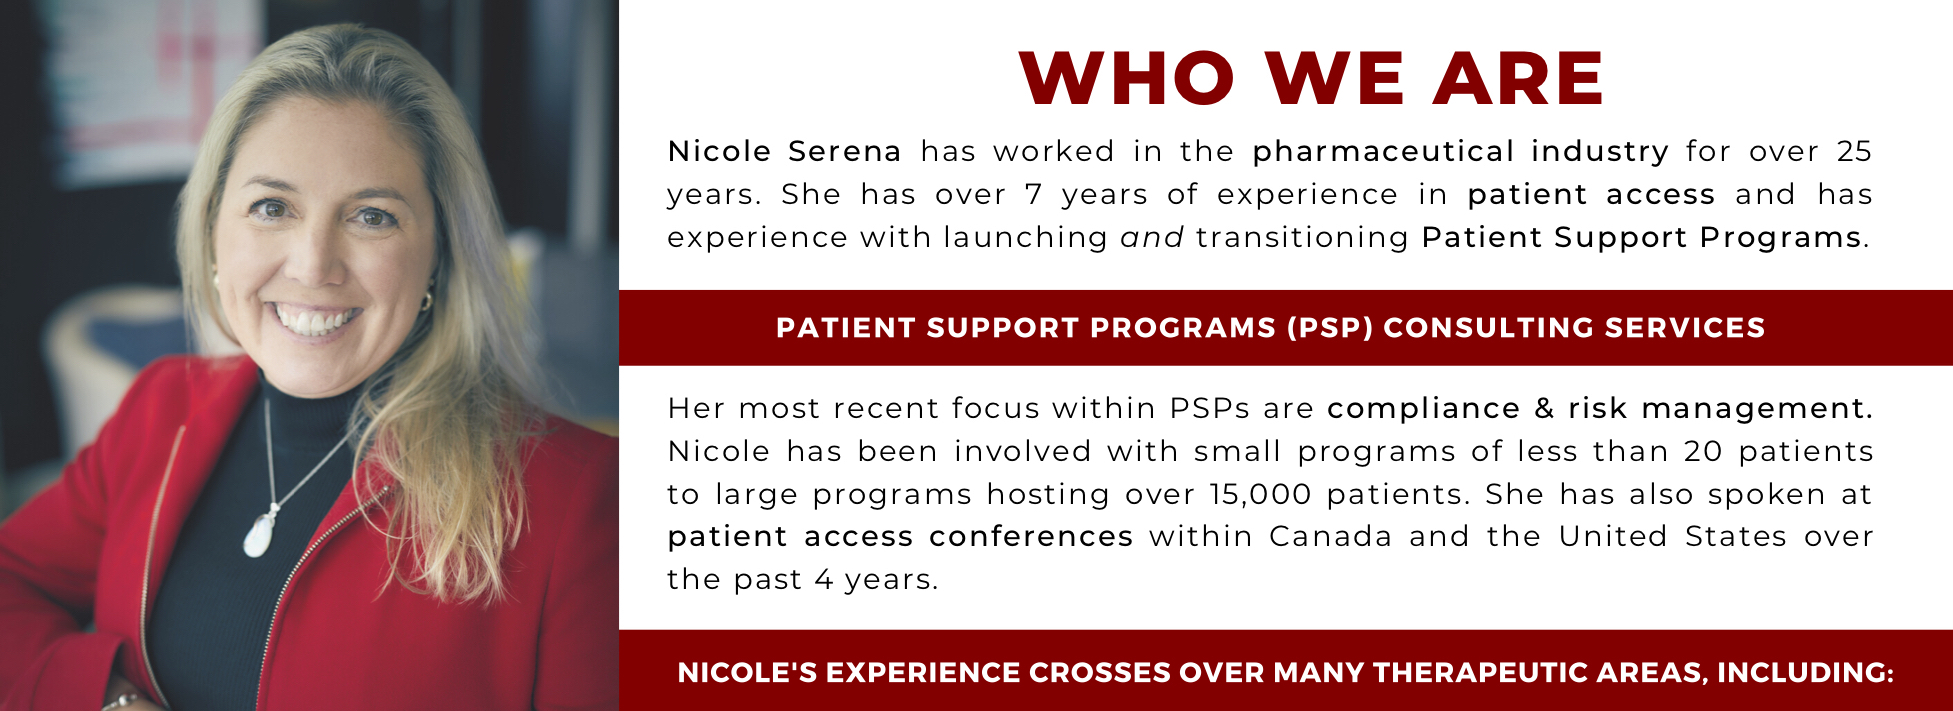 Who We Are. Nicole Serena has worked in the pharmaceutical industry for over 25 years. She has over 7 years of experience in patient access and has experience with launching and transitioning patient support programs. 